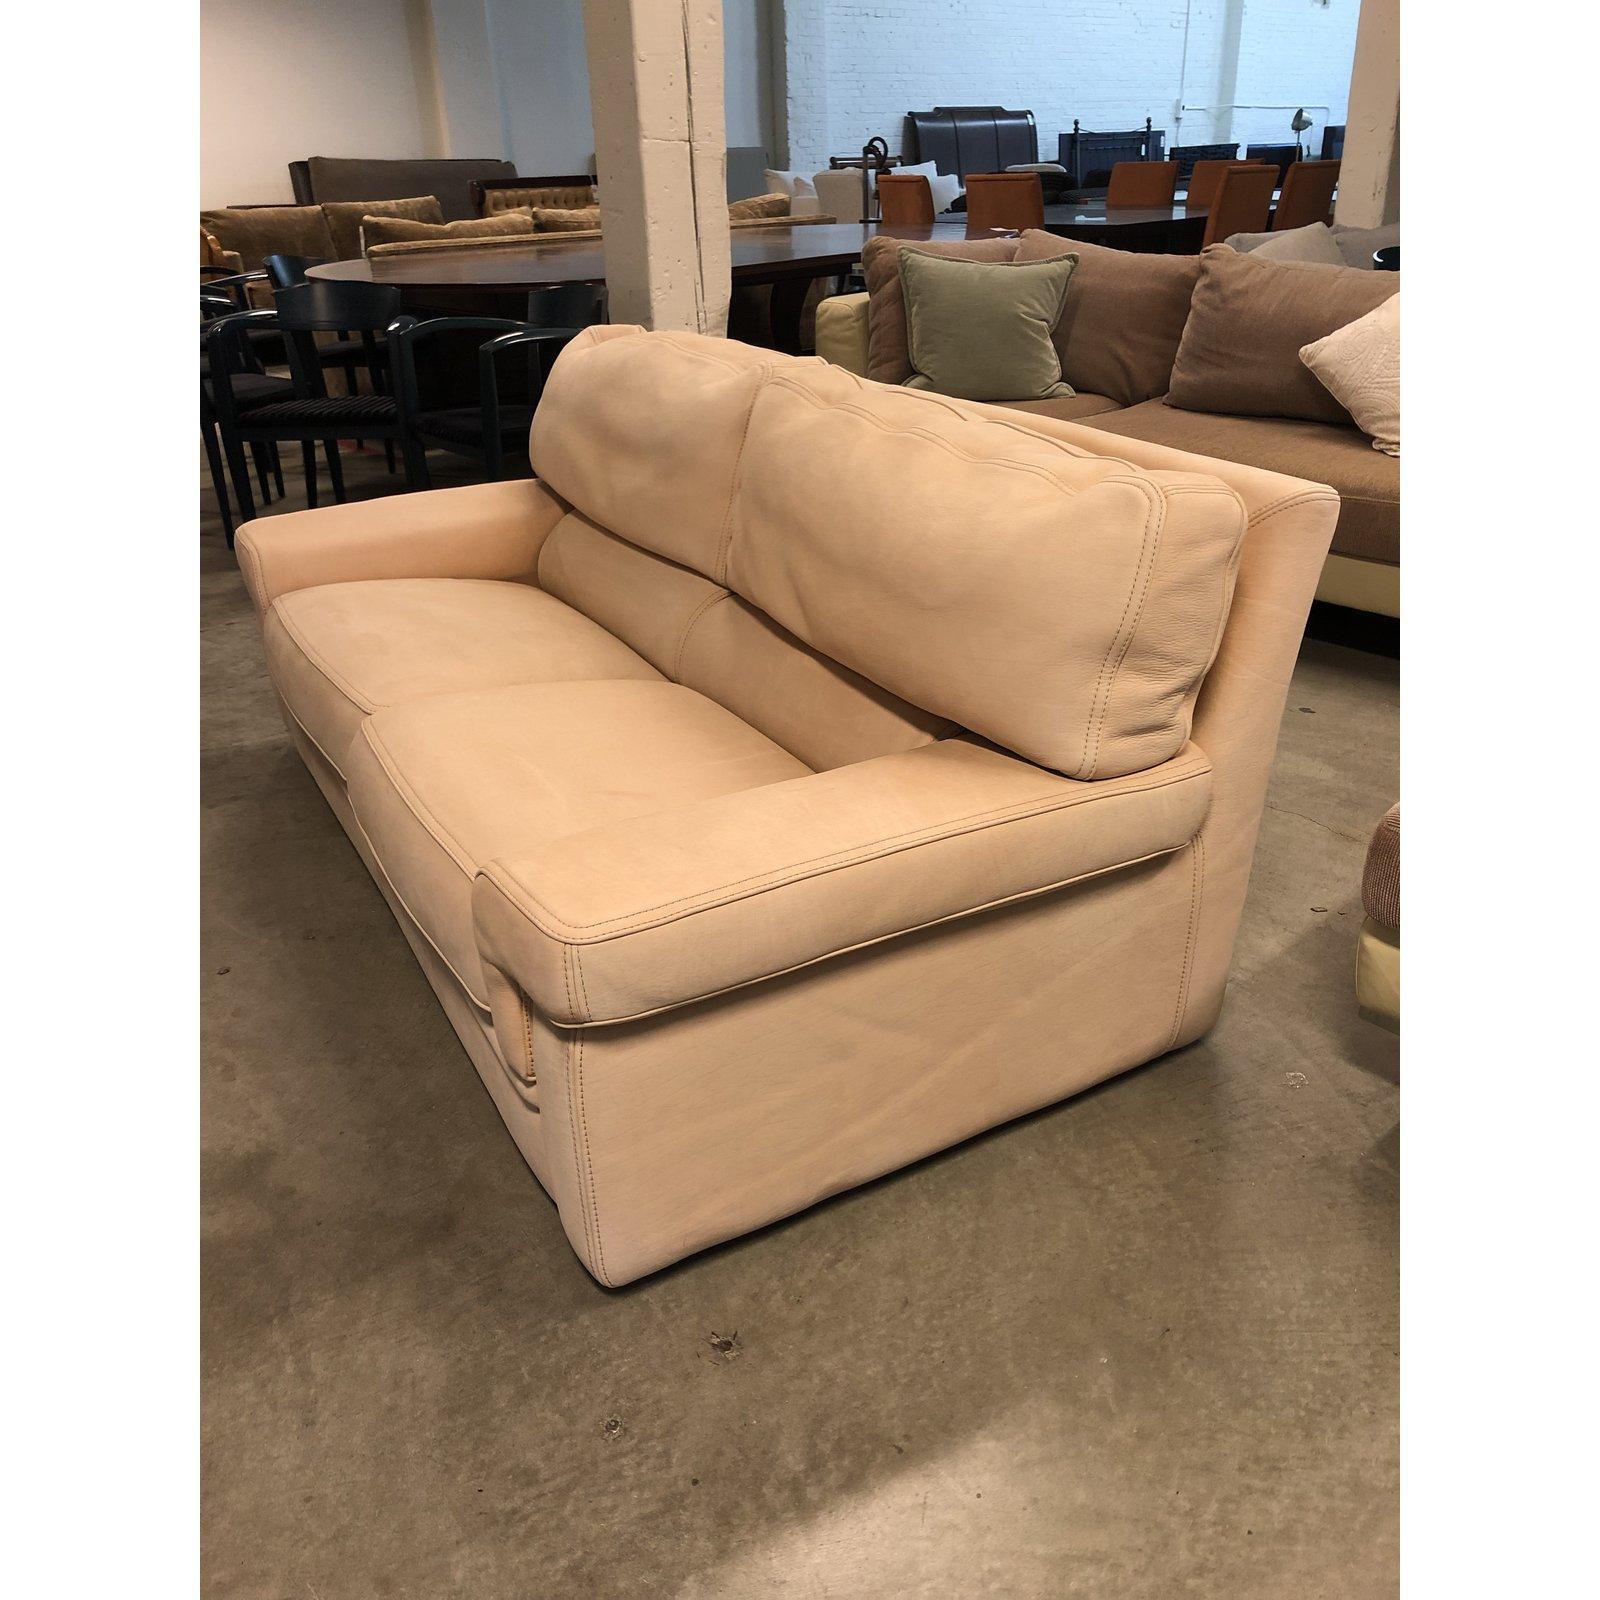 A leather loveseat by Roche Bobois. This lovely seating is from the Particuliere collection of Roche Bobois. A clean design upholstered in leather, visible fading on leather. The back cushions zip off. The piece was reupholstered, original branding